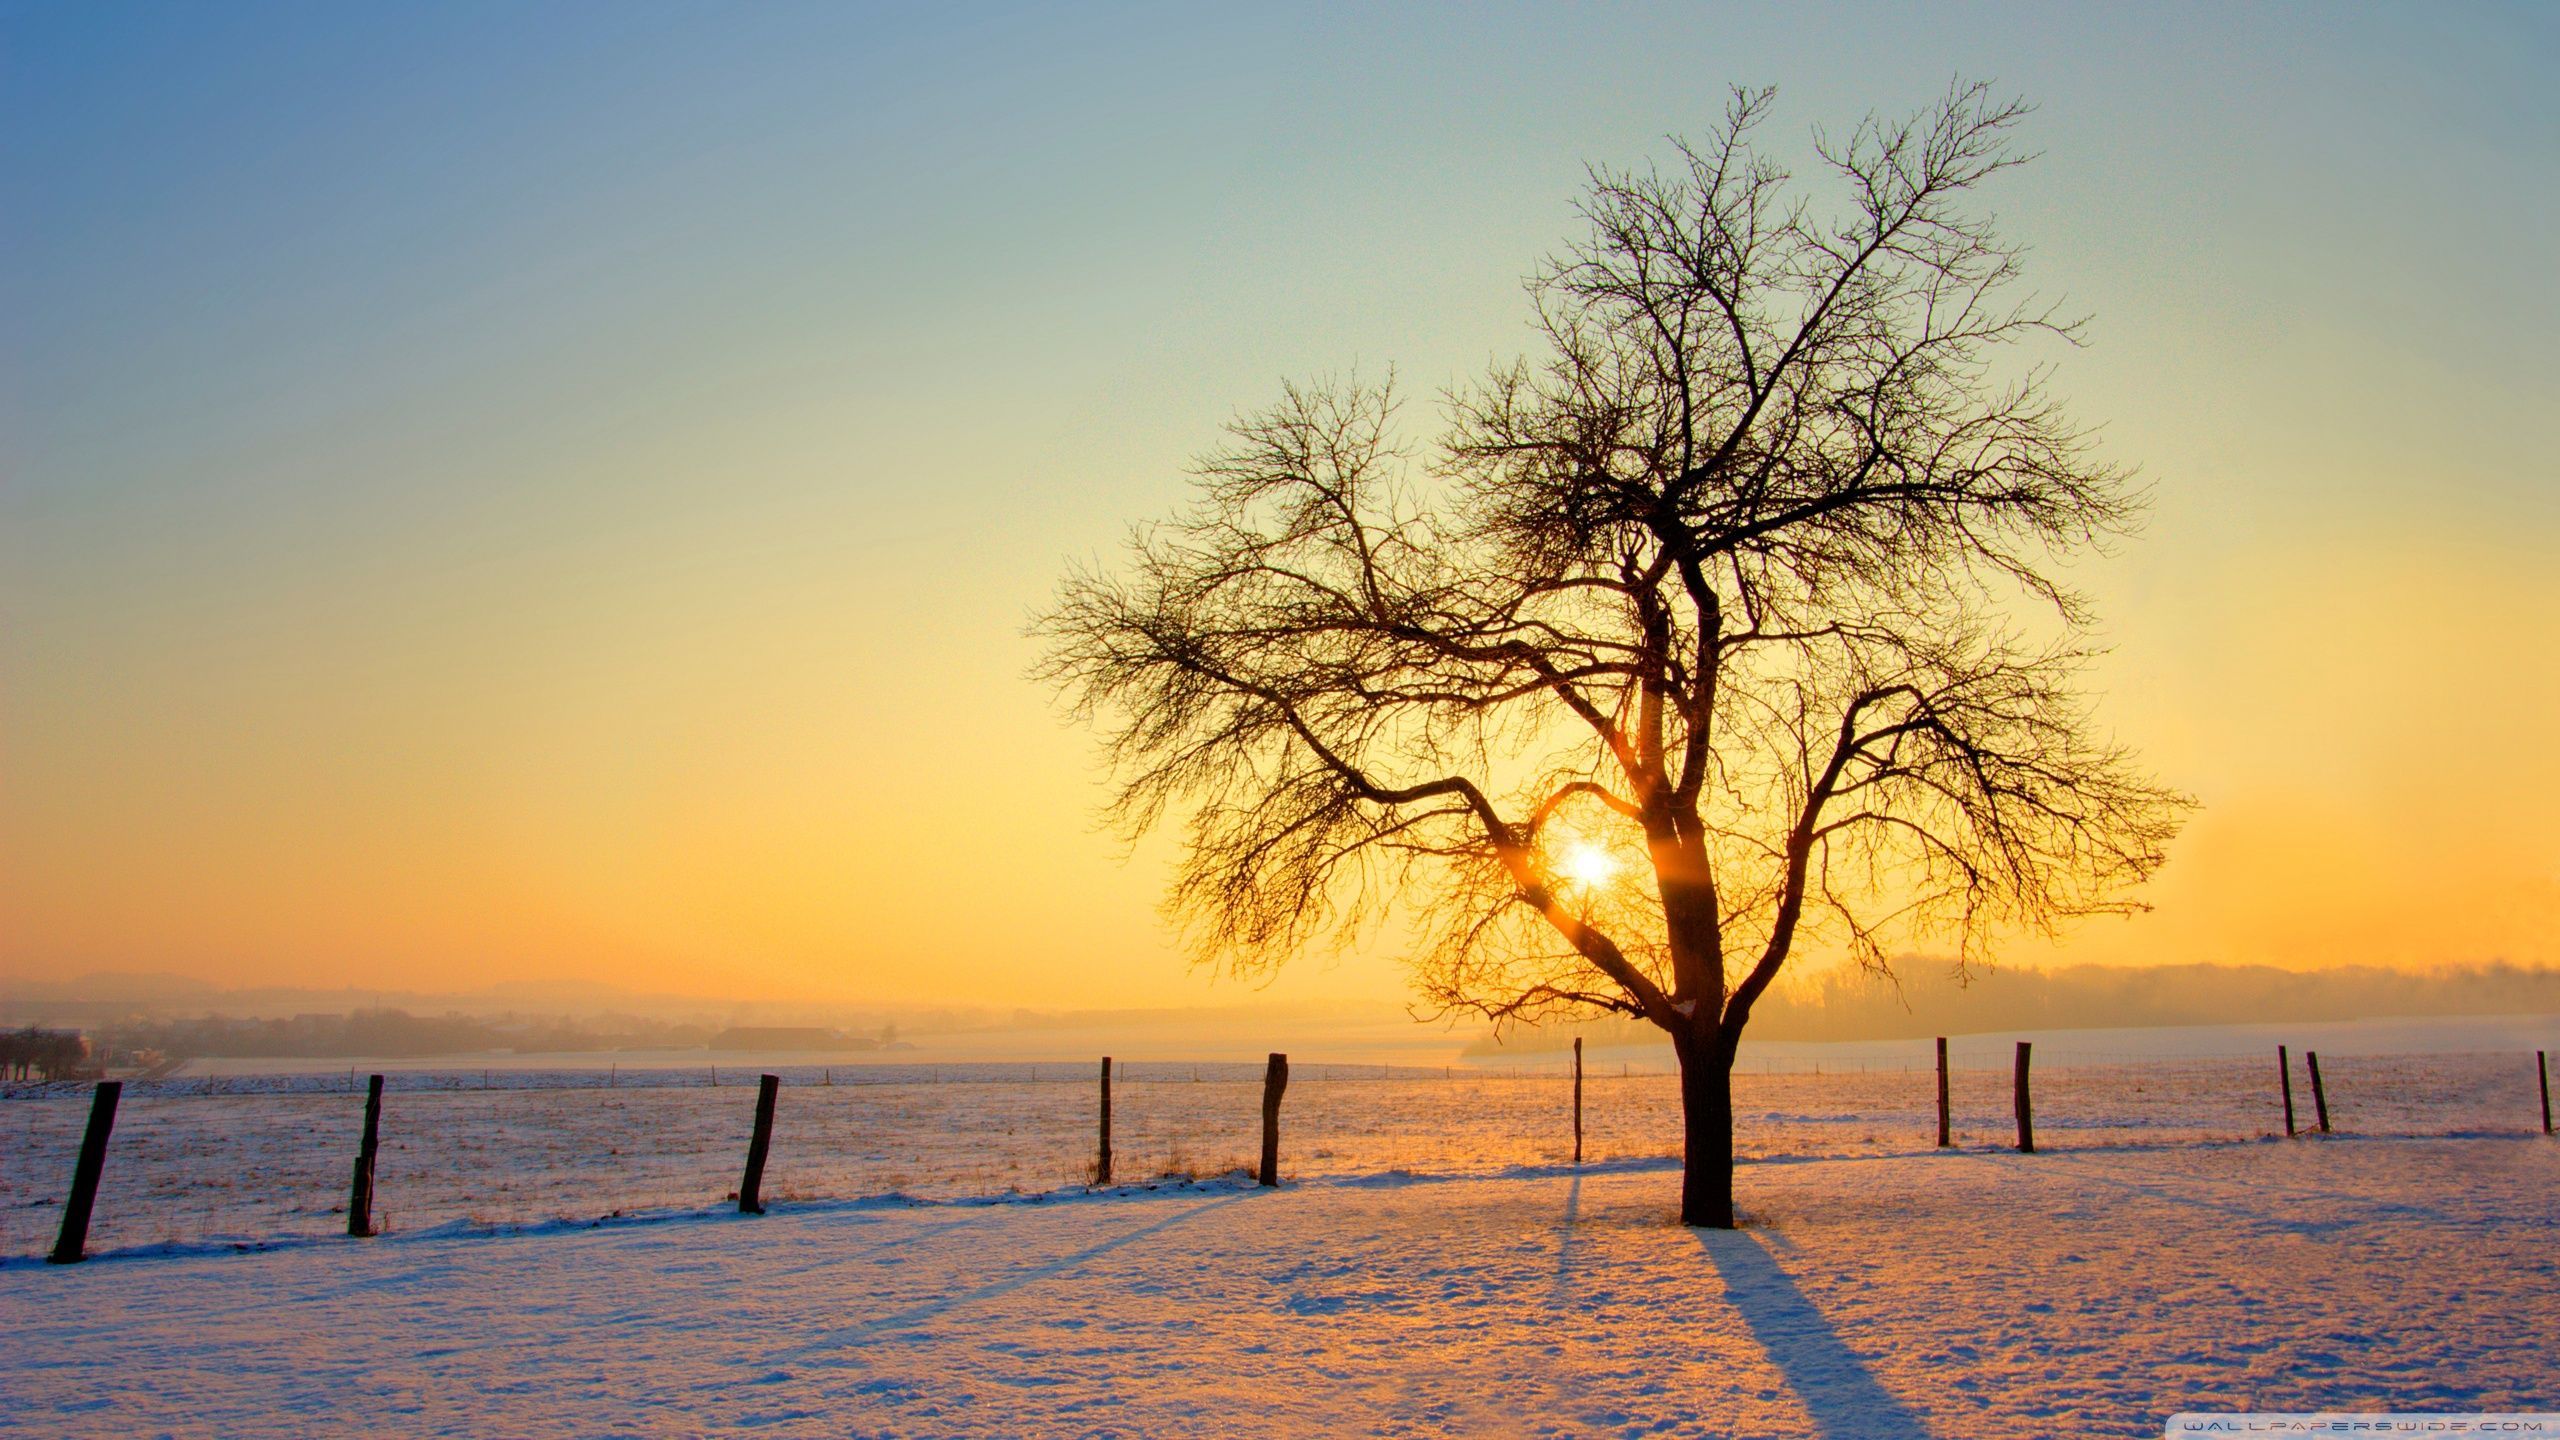 Beginning of a new day. Sunrise photography, Scenery wallpaper, Winter nature